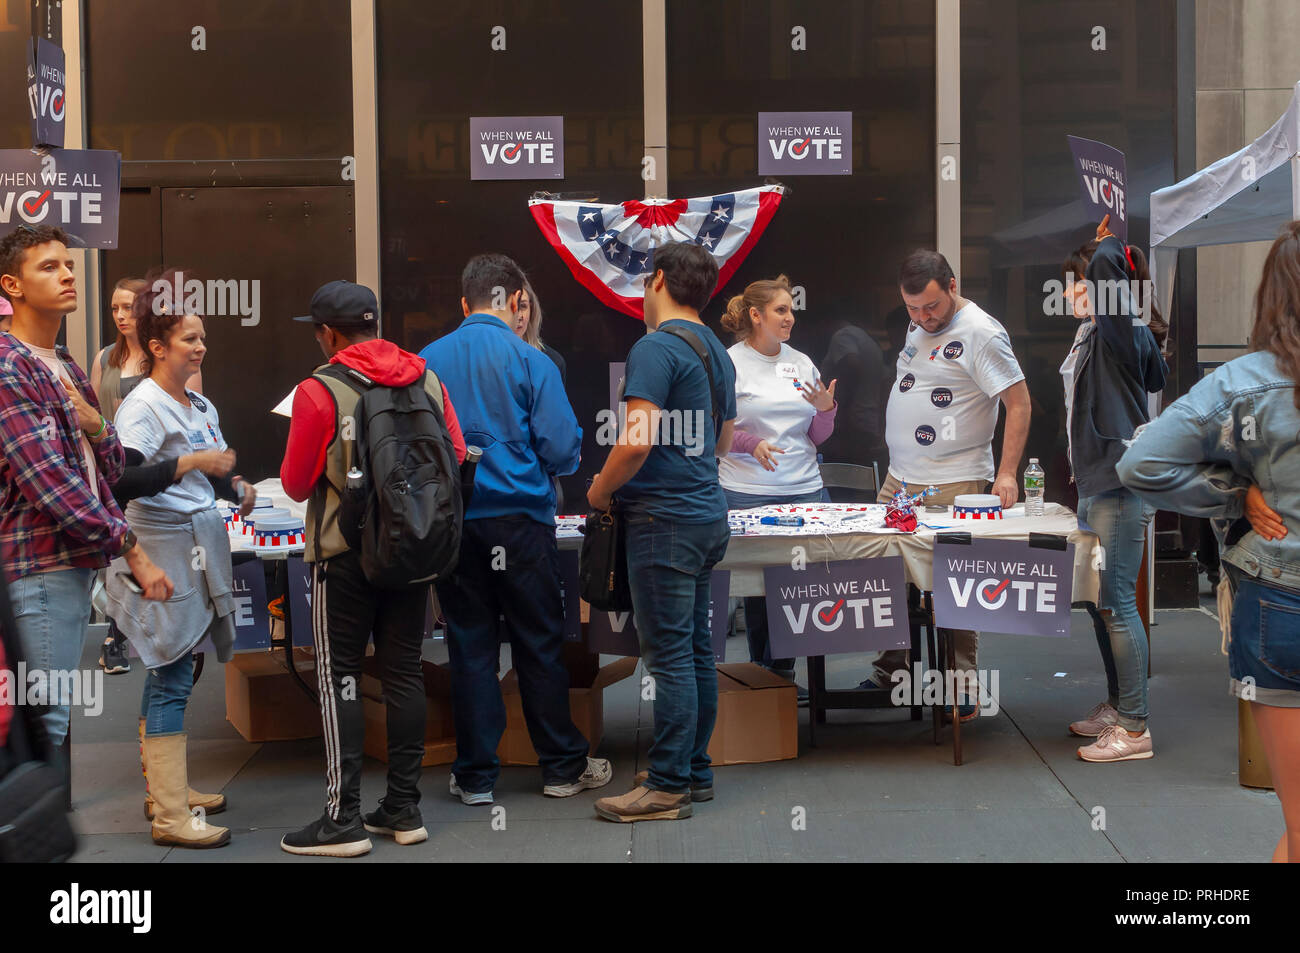 Voter promotion table at the 32nd Annual Broadway Flea Market & Grand Auction in New York in New York on Sunday, September 30, 2018. Over 50 tables from Broadway shows and theater related institutions and businesses occupy the streets around Shubert Alley offering their Broadway related wares and autographs. The fair is a fundraiser for the Broadway Cares/Equity Fights Aids charity.  (Â© Richard B. Levine) Stock Photo